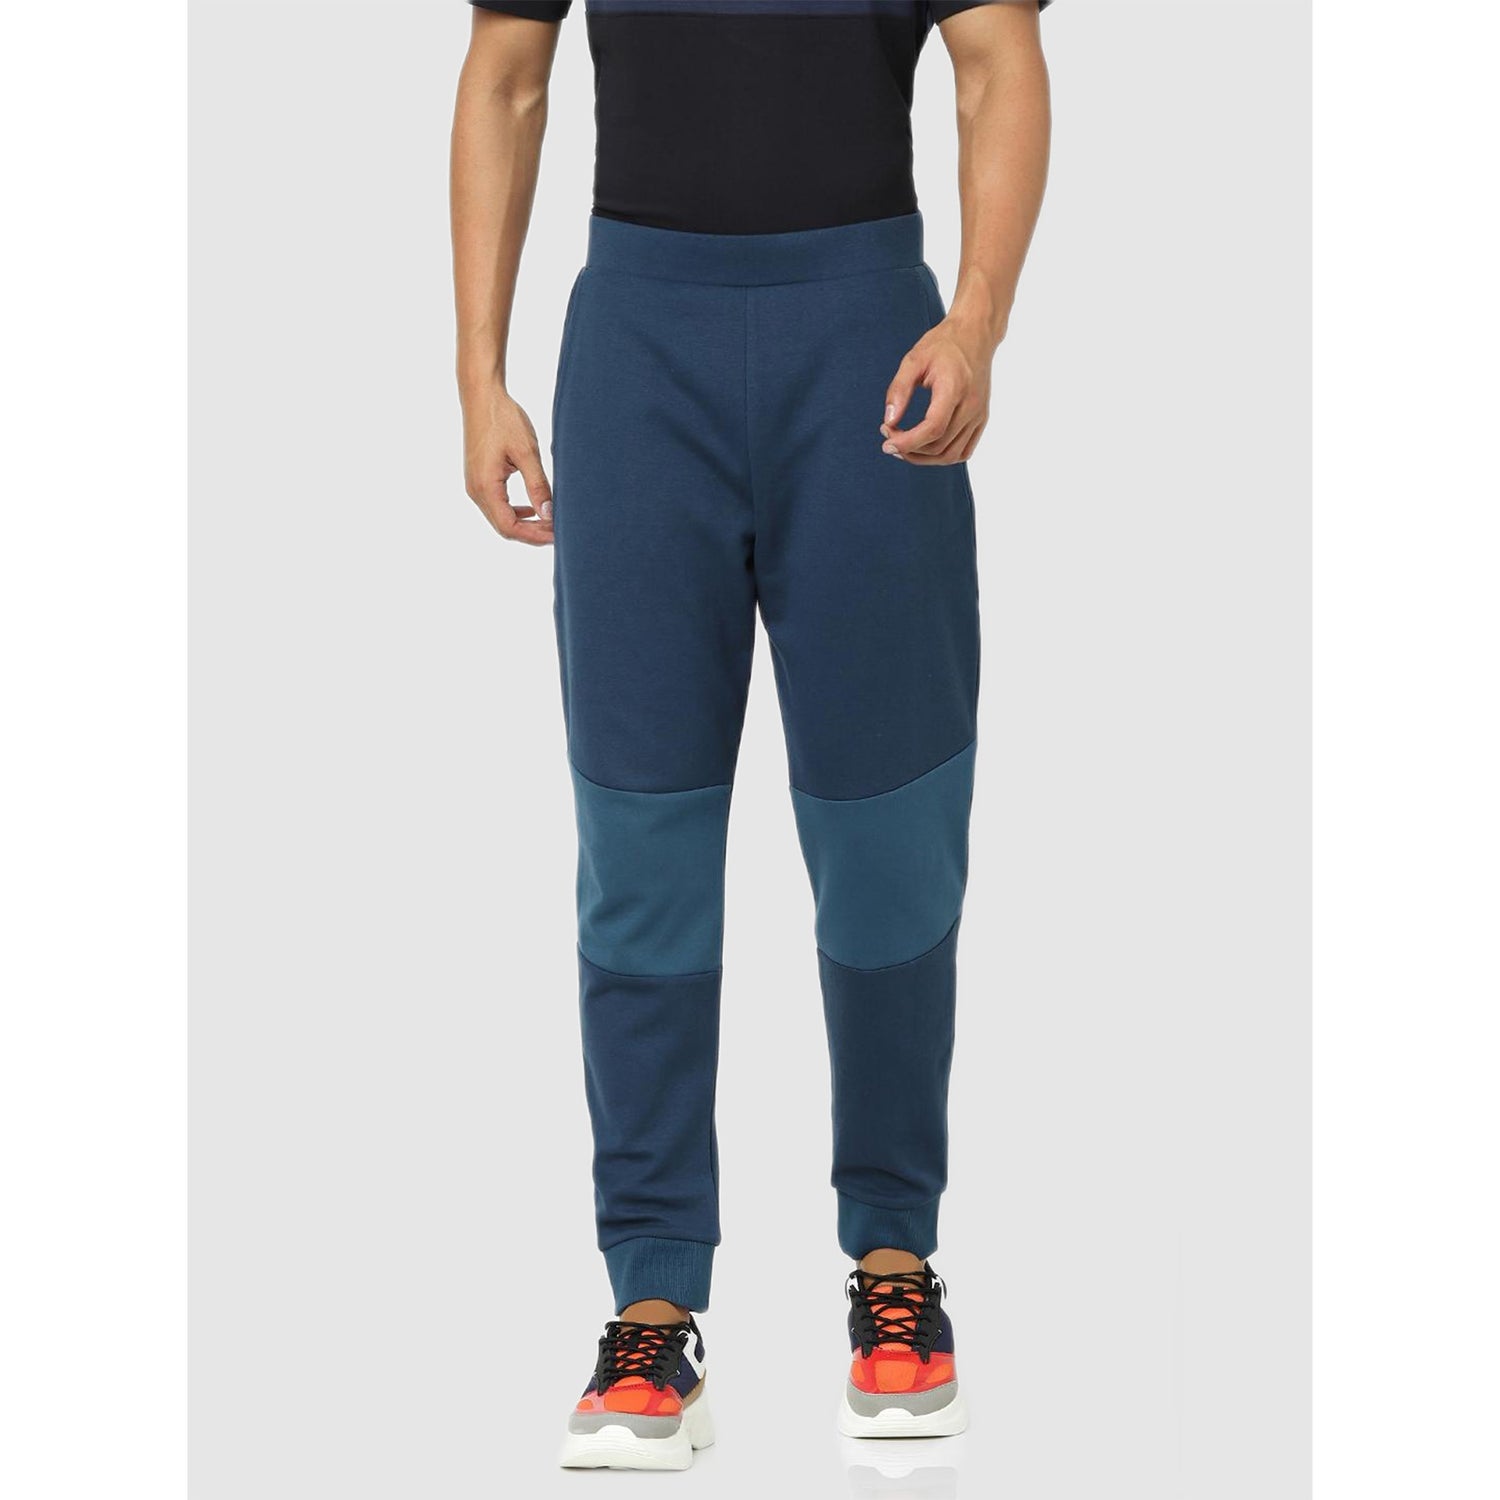 Navy Blue Regular Fit Classic Solid Joggers Trousers (VOJOGYOKE)